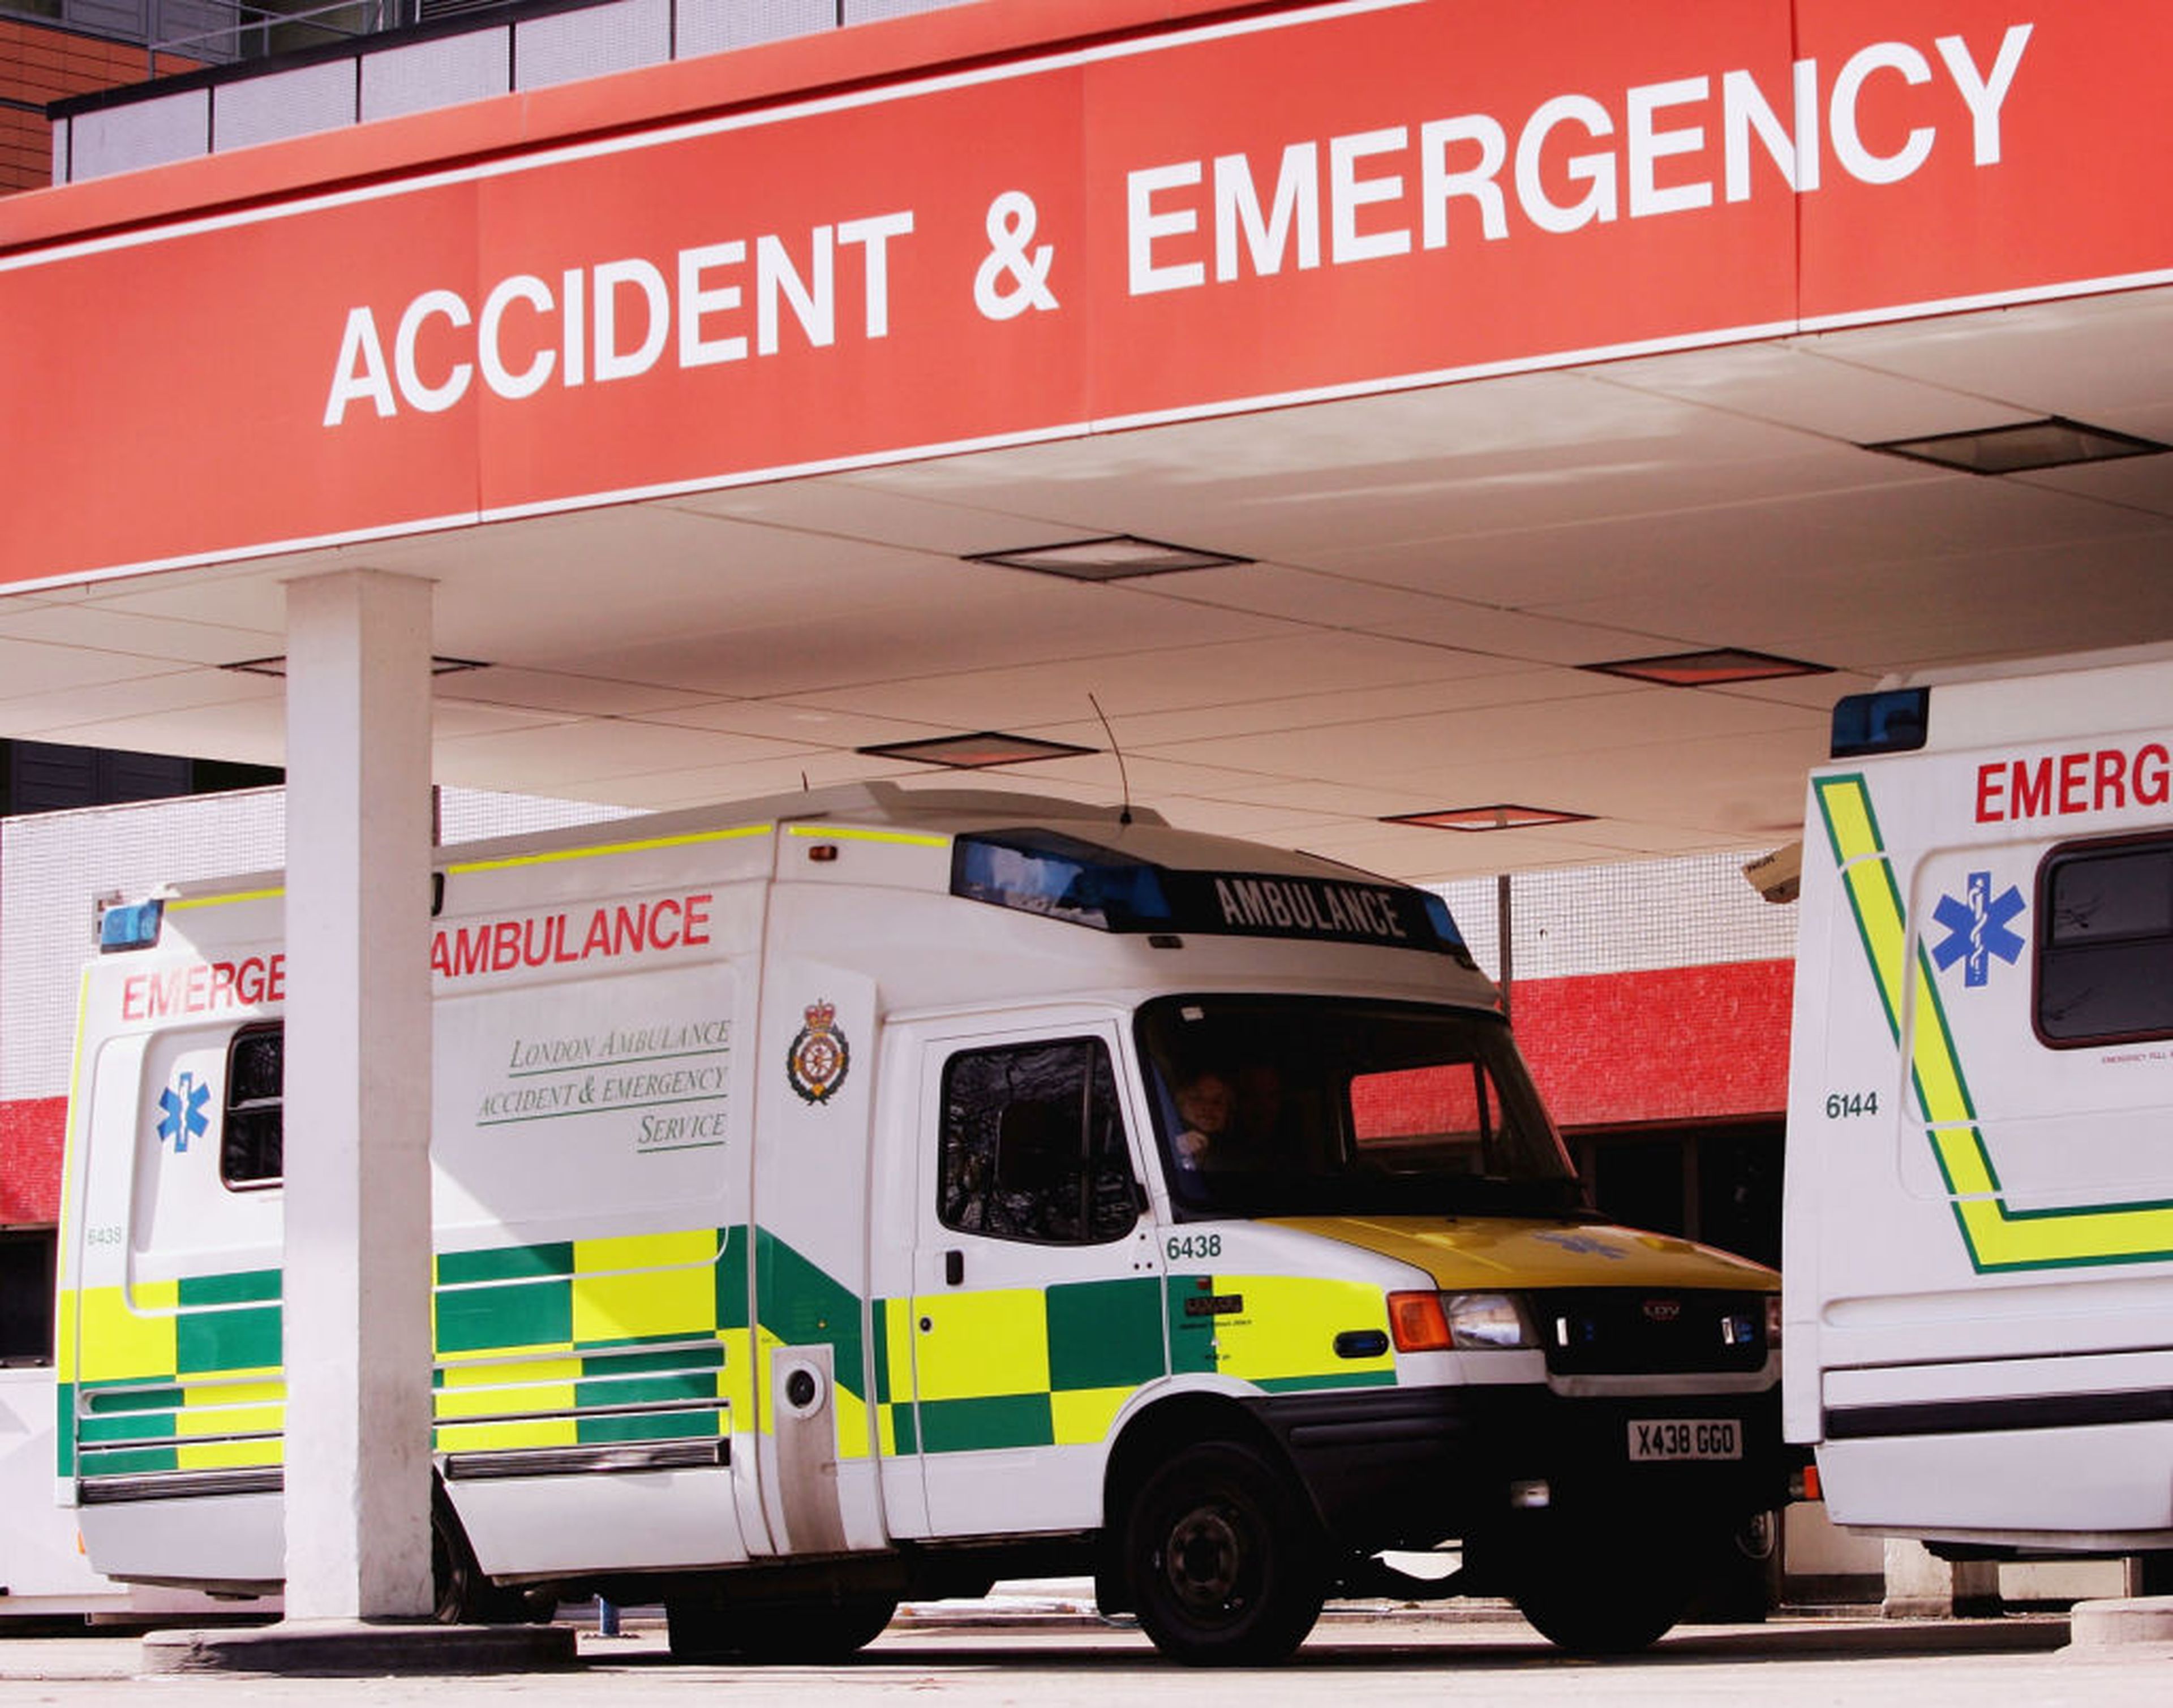 Ambulances are seen at the Accident and Emergency department of St. Thomas&#8217; Hospital on March 3, 2005, in London. (Photo by Graeme Robertson/Getty Images)